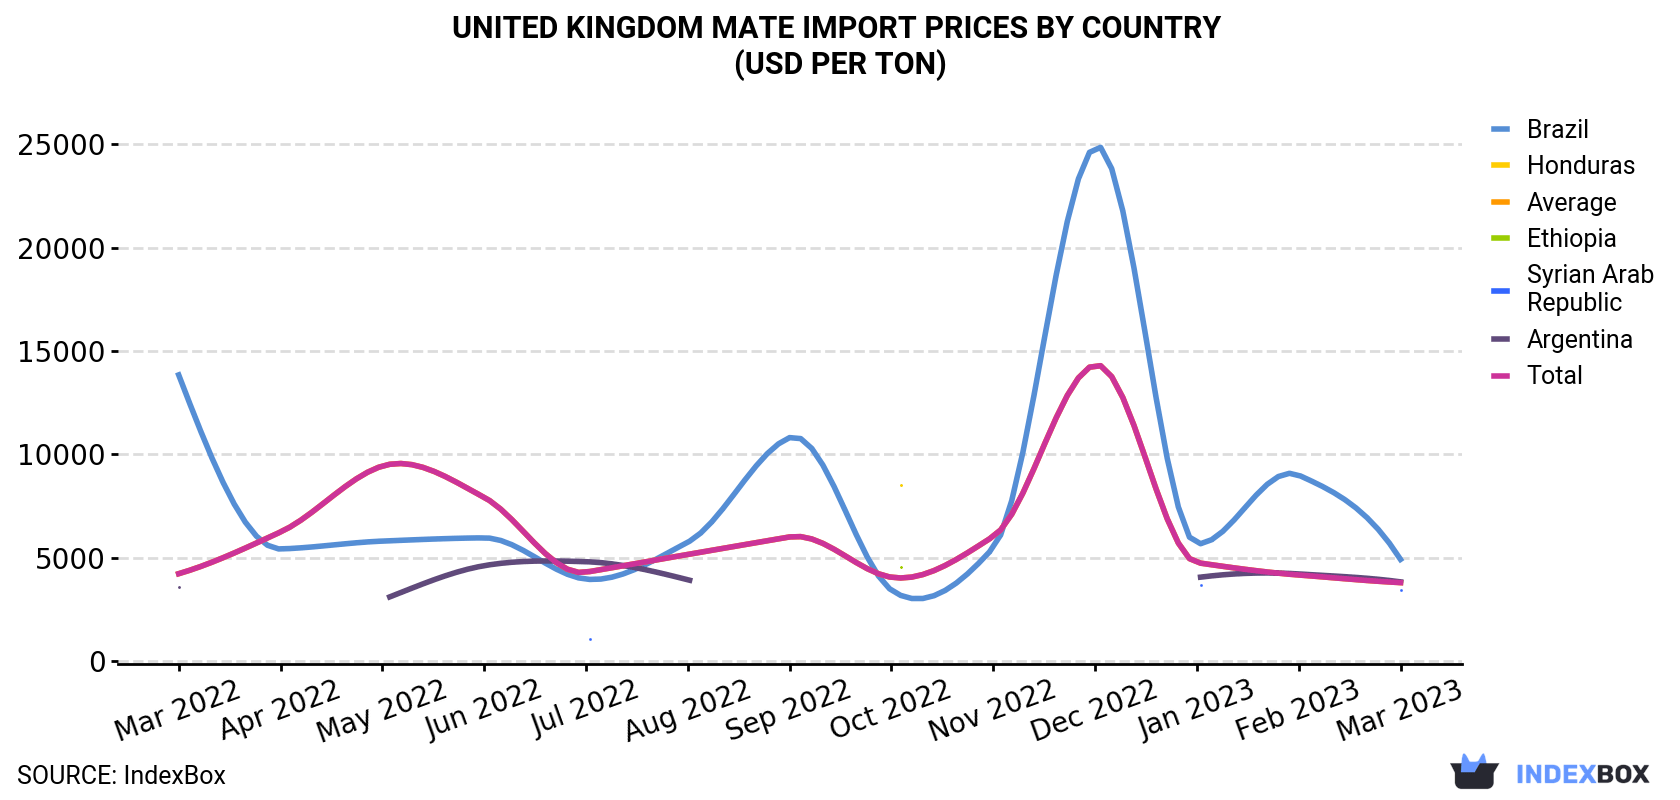 United Kingdom Mate Import Prices By Country (USD Per Ton)